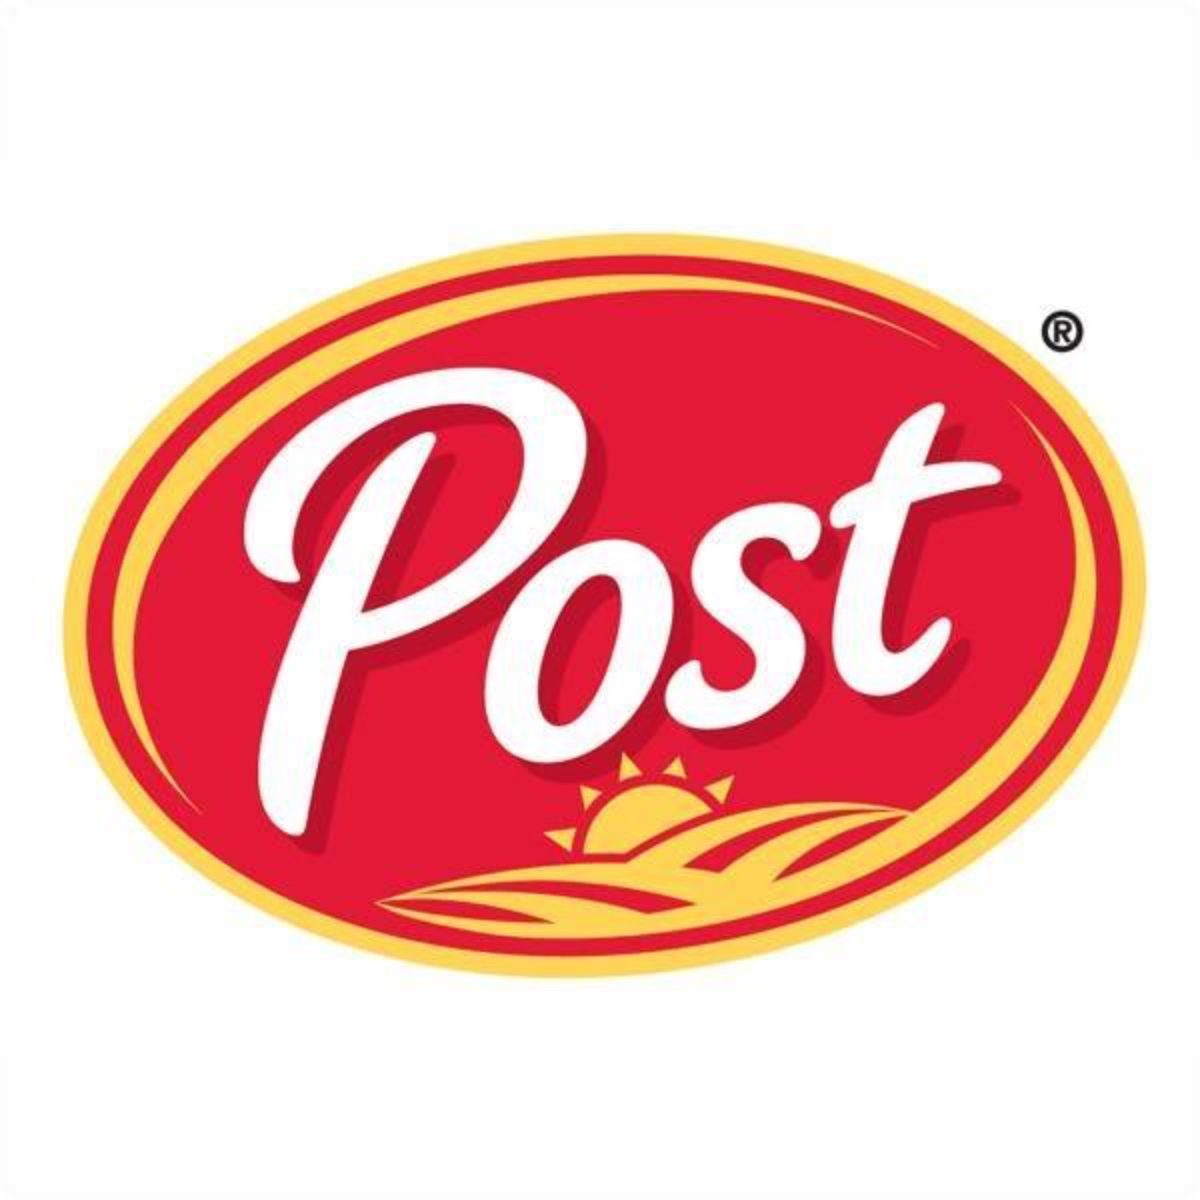 <p><strong><a class="SWhtmlLink" href="https://www.postconsumerbrands.com" rel="noopener">Post</a>, Salt Lake City</strong></p> <p>Post is the third largest producer of cereal in the United States, after General Mills and Kellogg's. The makers of Honey Bunches of Oats and Fruity Pebbles distributes most of their cereals out of Salt Lake City.</p>